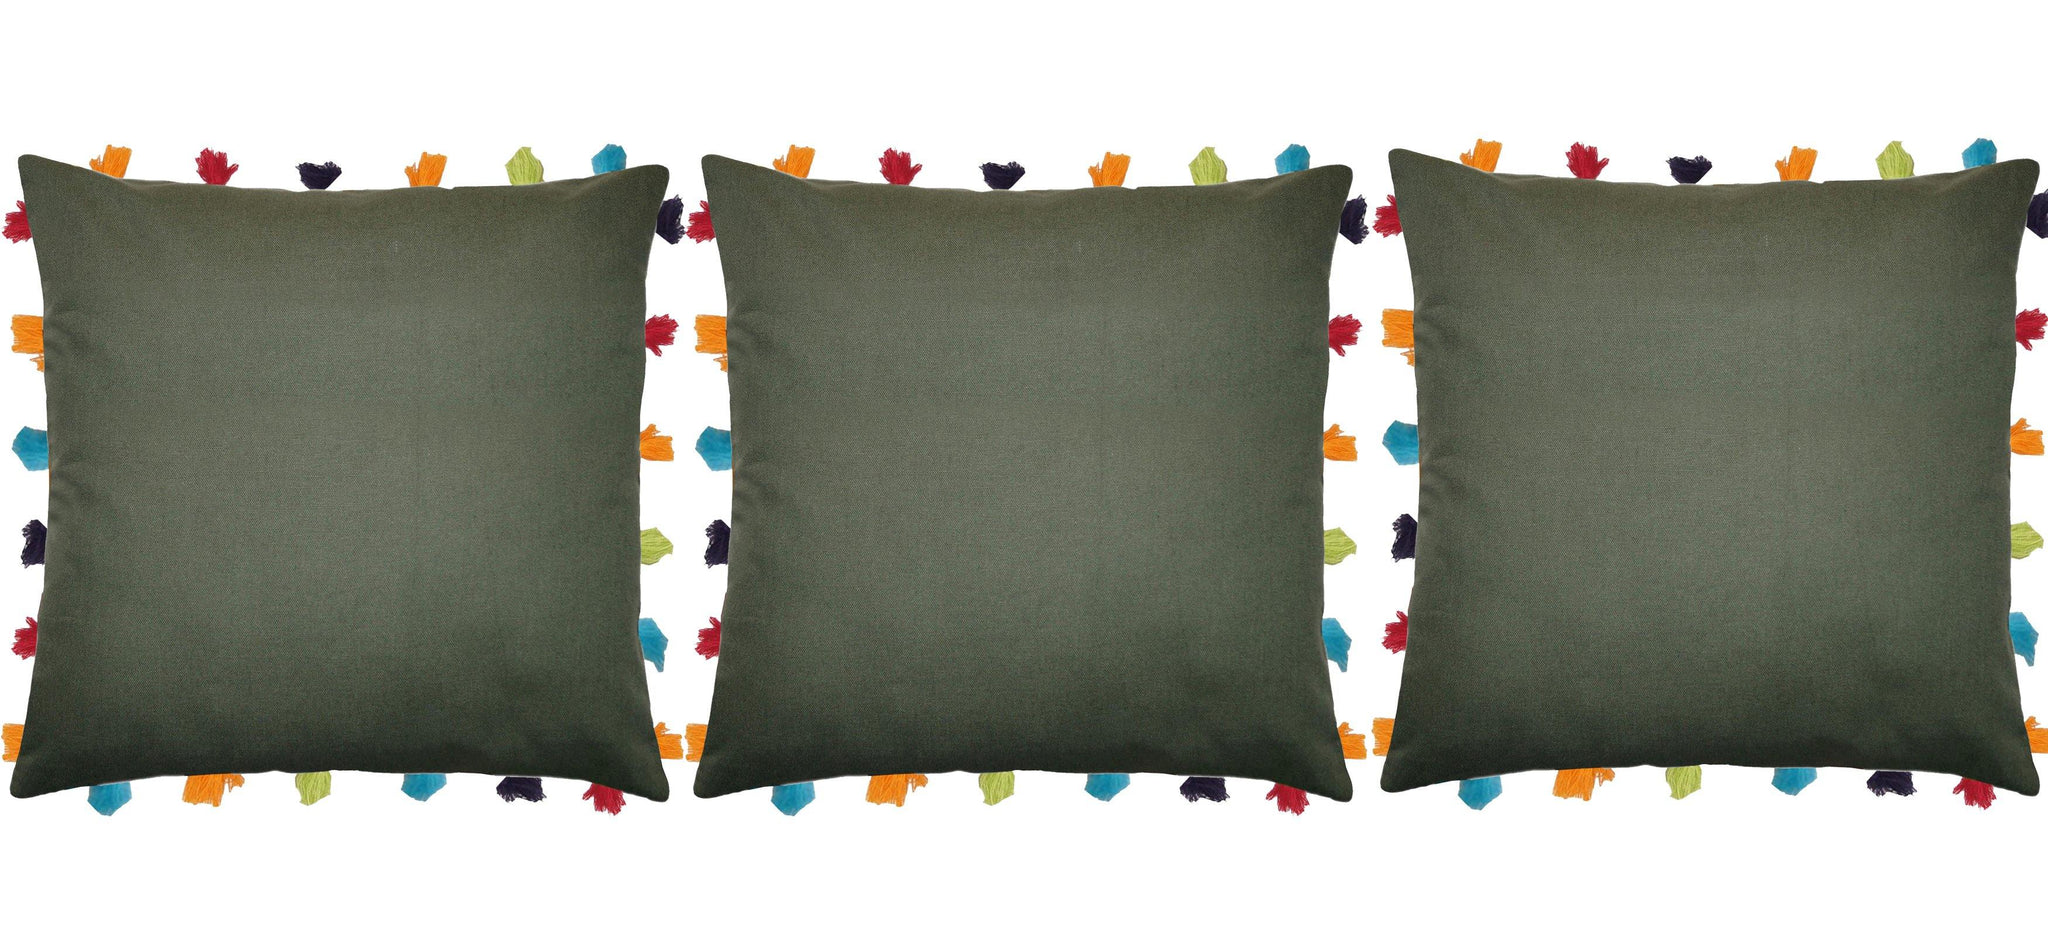 Lushomes Vineyard Green Cushion Cover with Colorful tassels (3 pcs, 18 x 18”) - Lushomes